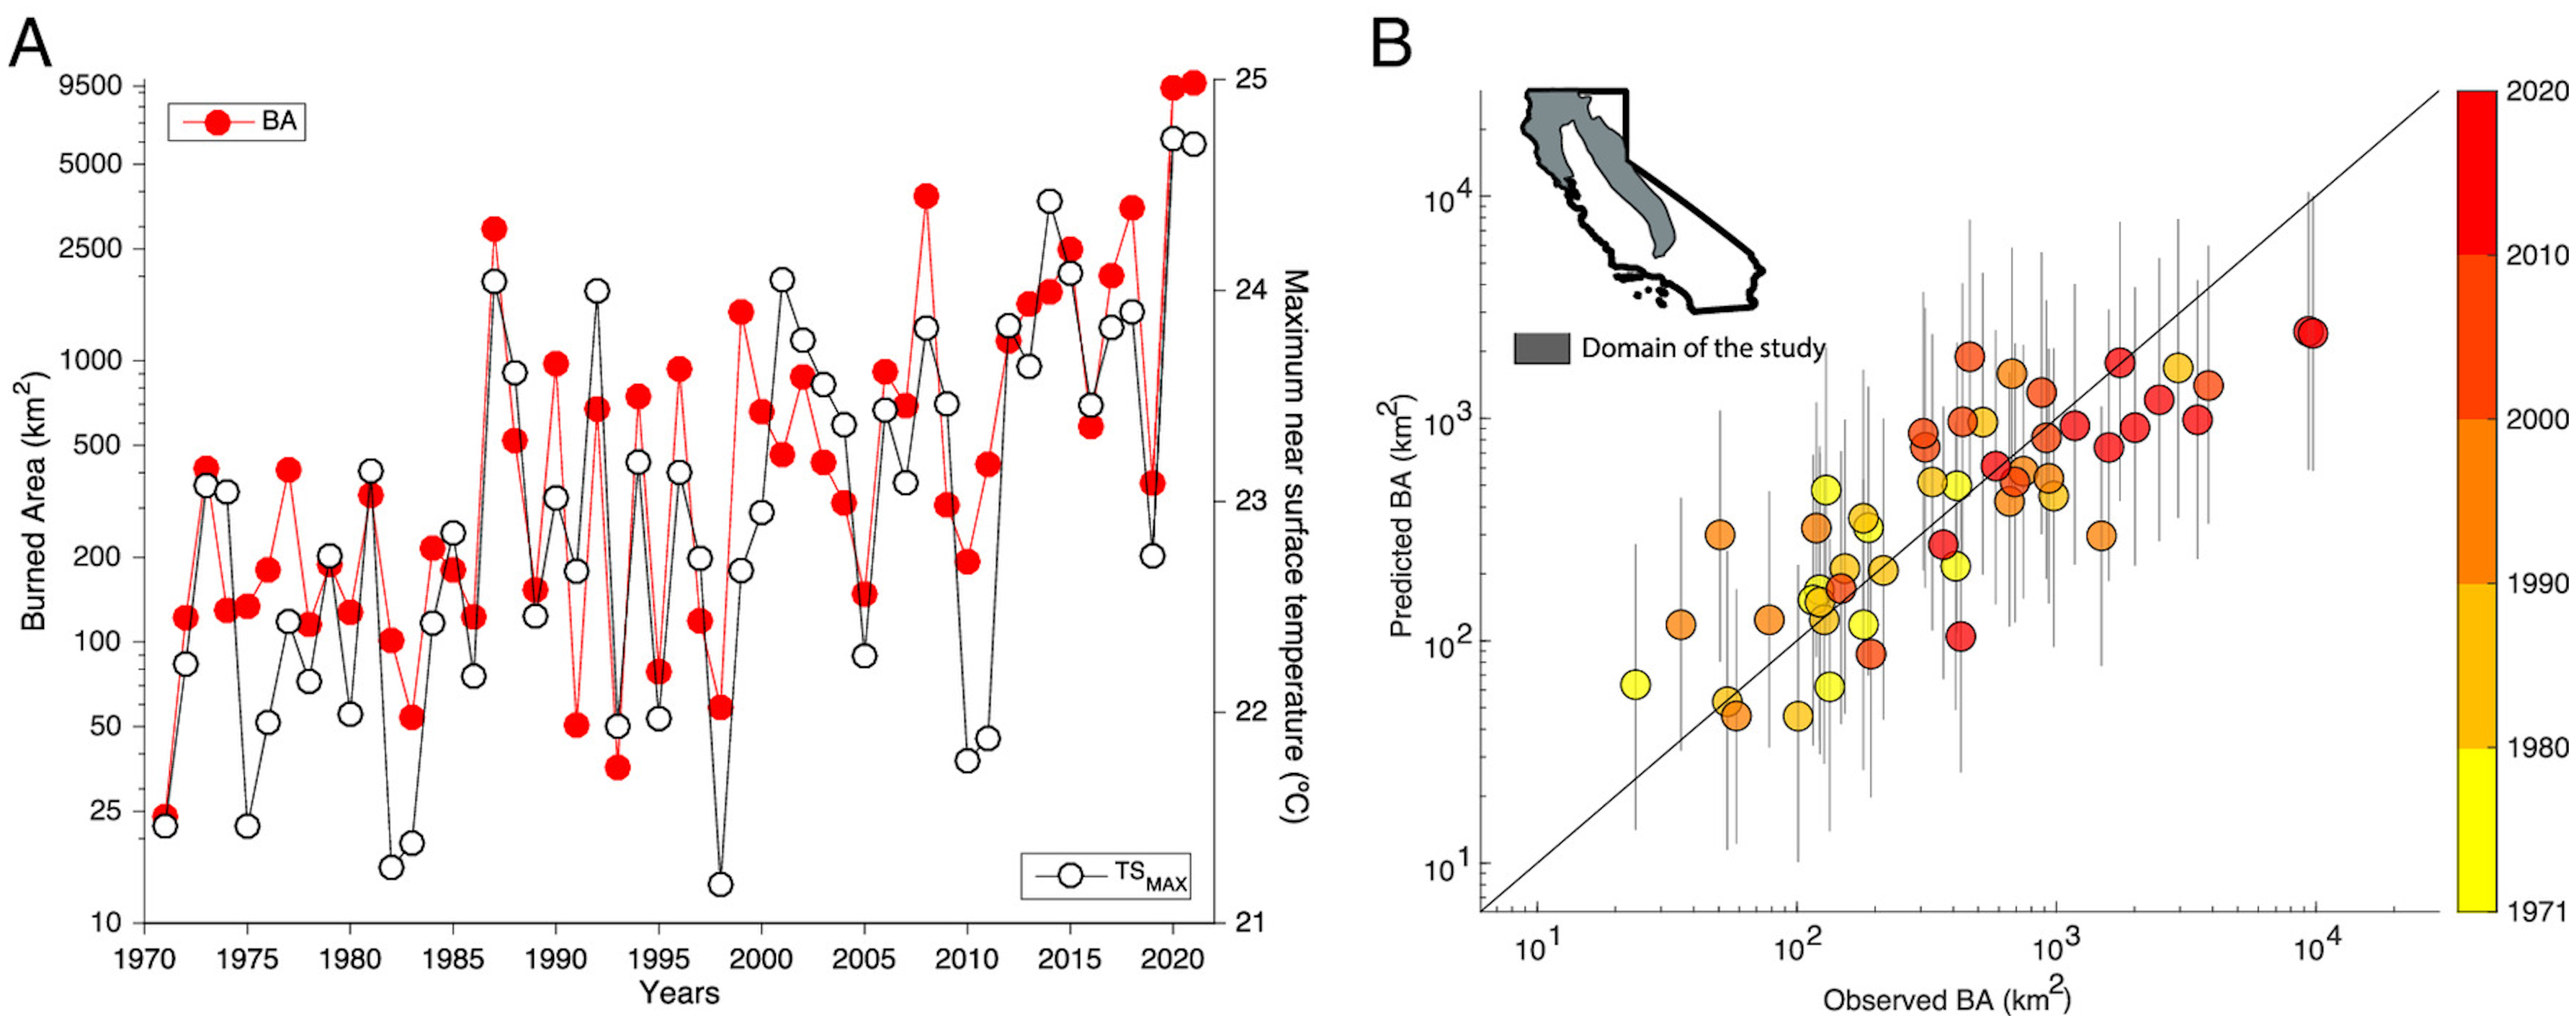 (A) Time series of summer (May to September) forest fire burned area (BA, in red) and spring to summer (April to October) maximum near surface temperature (TSMAX; in black) from 1971 to 2021 in California; (B) observed versus out-of-sample 10-fold predicted changes in BA. Vertical gray lines indicate 2.5th and 97.5th percentiles of 10,000 different predictions. Colors indicate the decade of each sample. The Inset shows a map of California with the domain of interest shaded in gray. Graphic: Turcu, et al., 2023 / PNAS